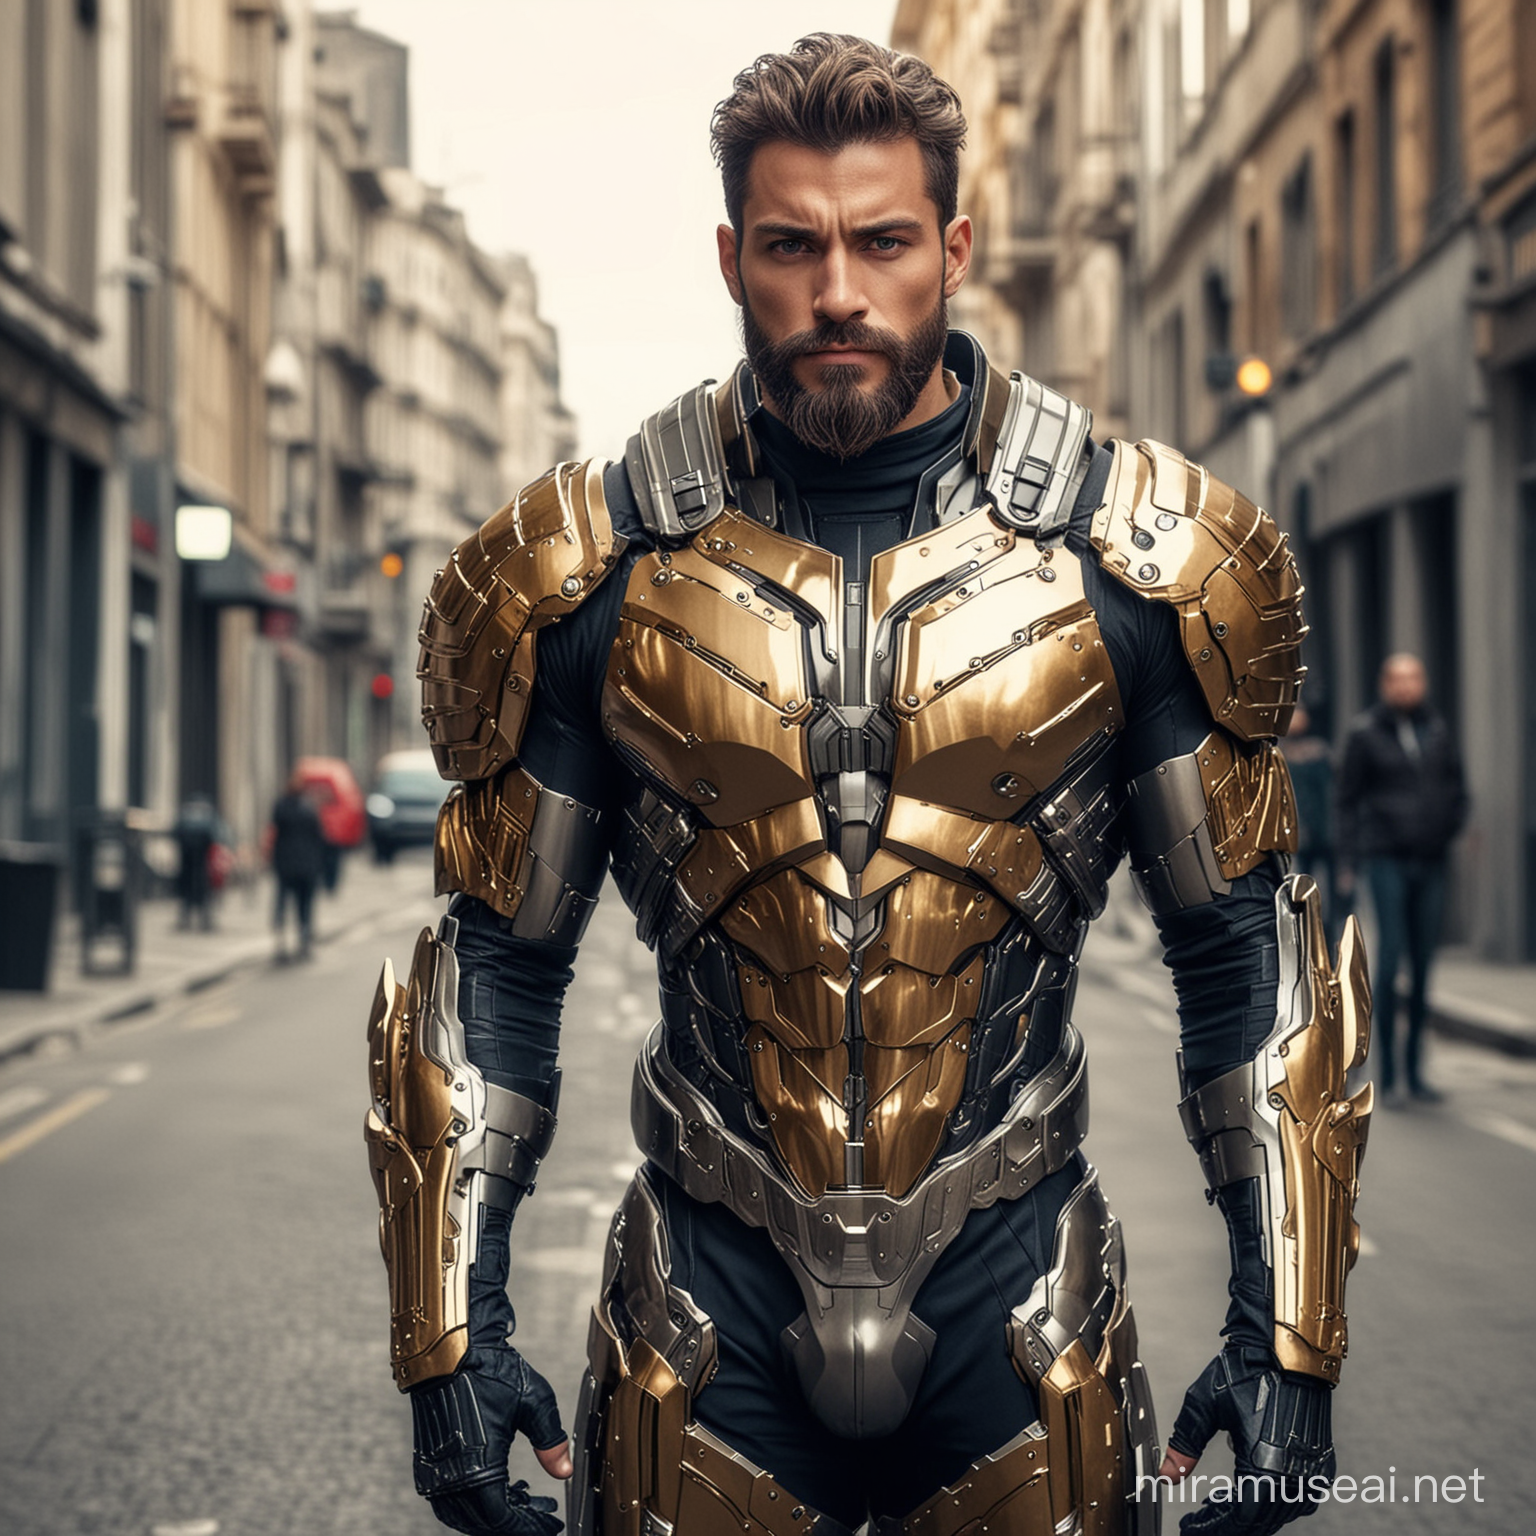 Tall and handsome muscular men with beautiful hairstyle and beard with attractive eyes and Big wide shoulder and chest in sci-fi High Tech golden, silver and black armour suit with firearms standing on street 